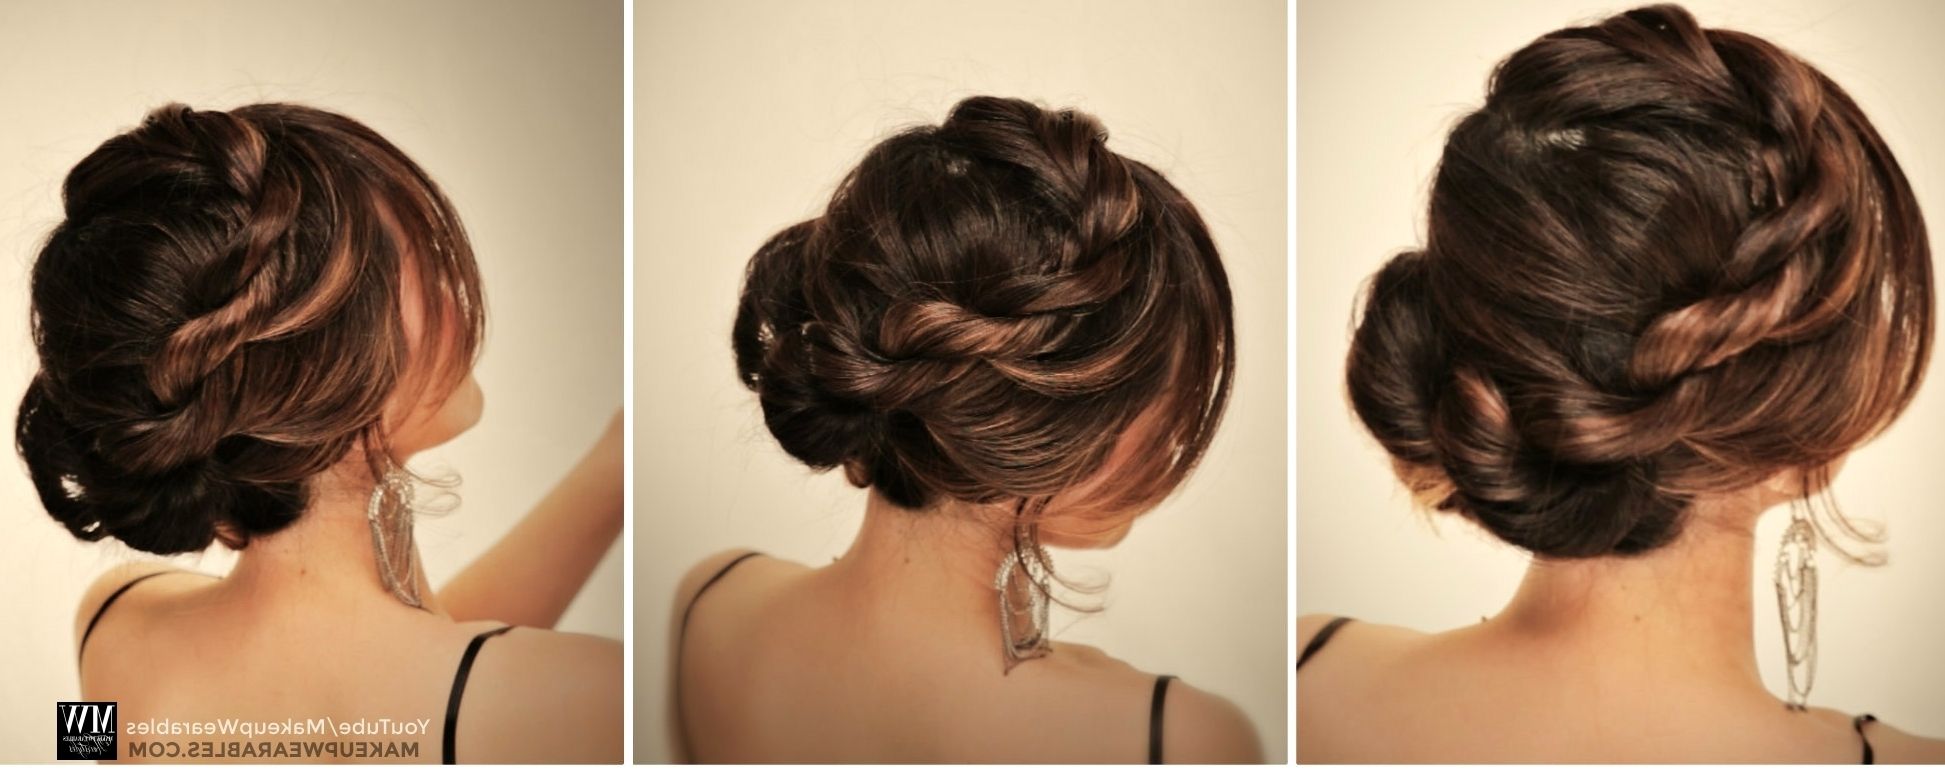 How To: 5 Amazingly Cute + Easy Hairstyles With A Simple Twist Inside Easiest Updo Hairstyles For Long Hair (View 11 of 15)